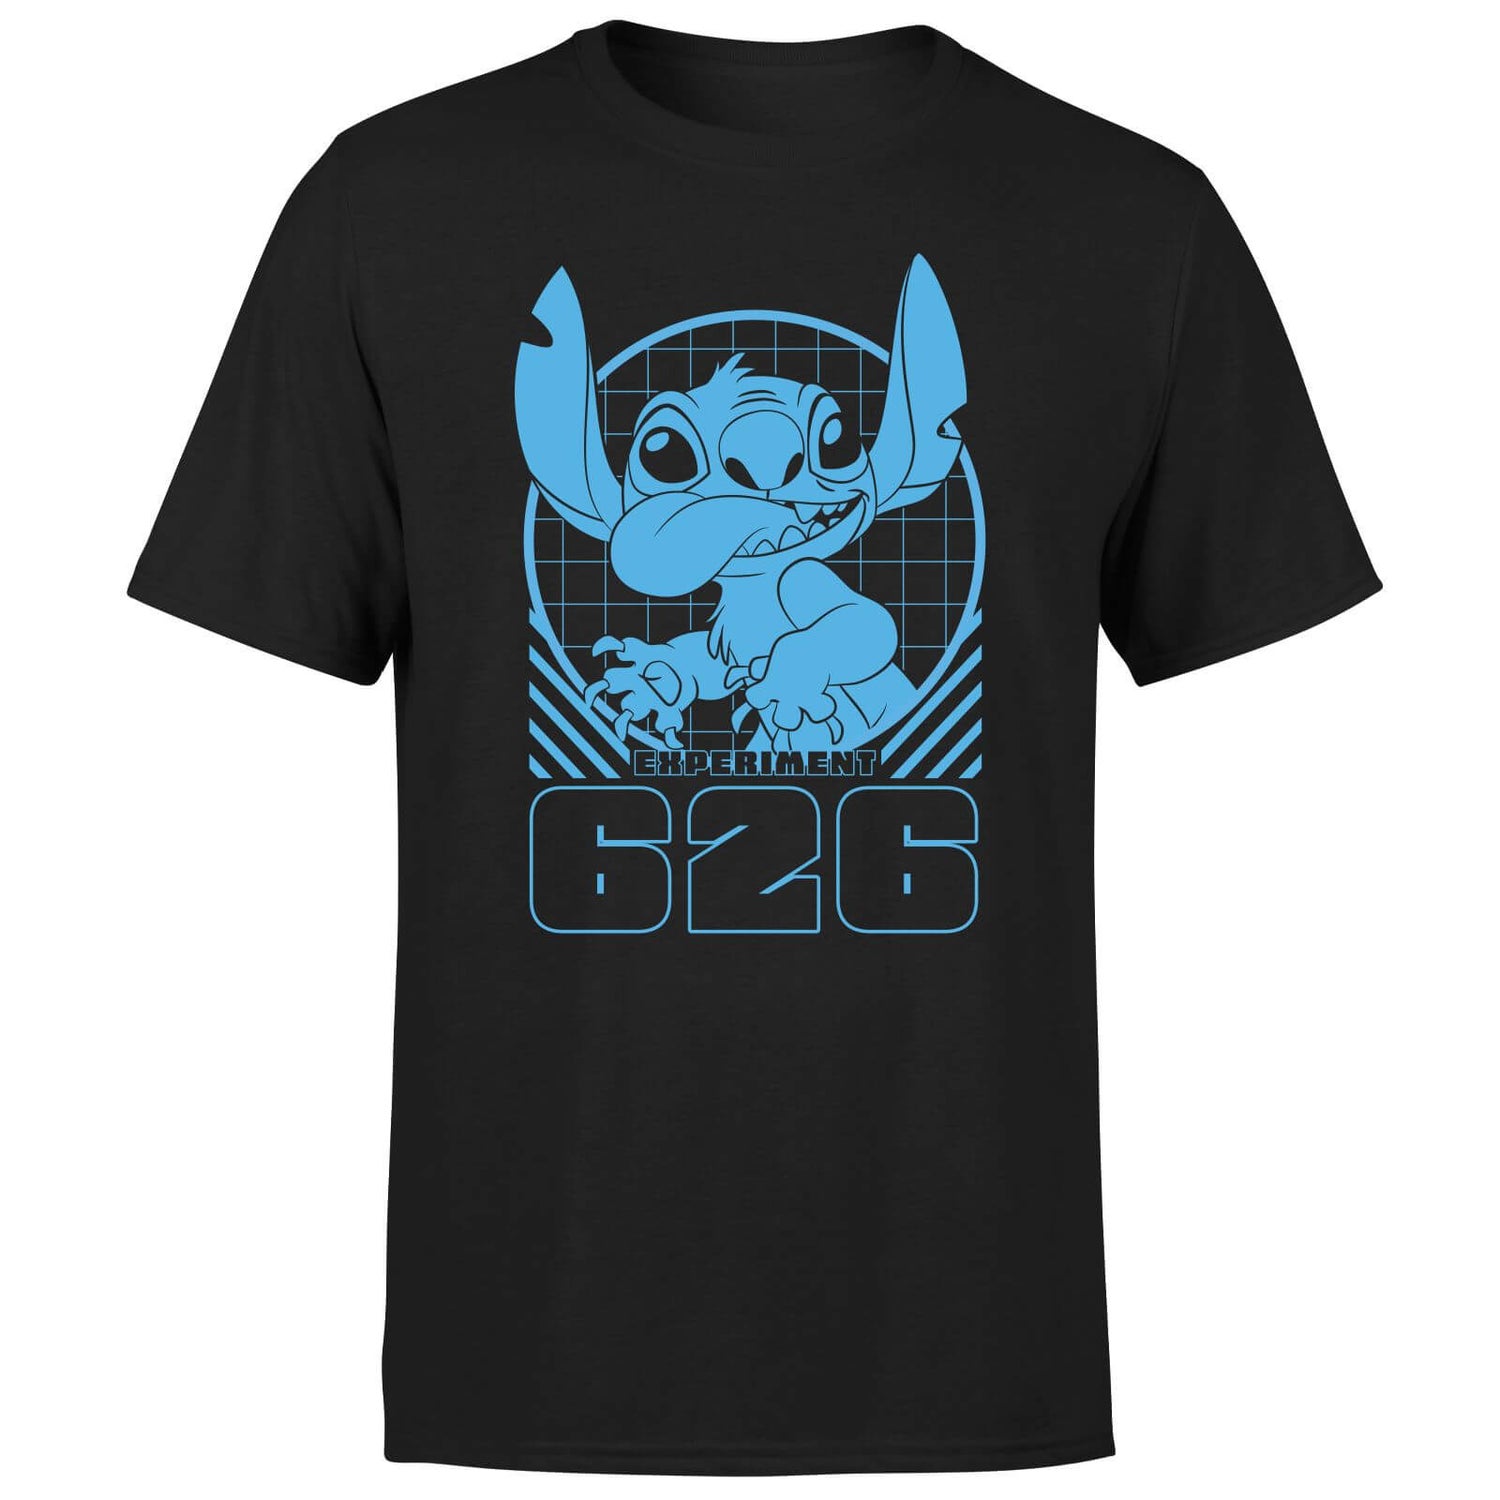 Lilo And Stitch Warning Experiment 626 Men's T-Shirt - Black